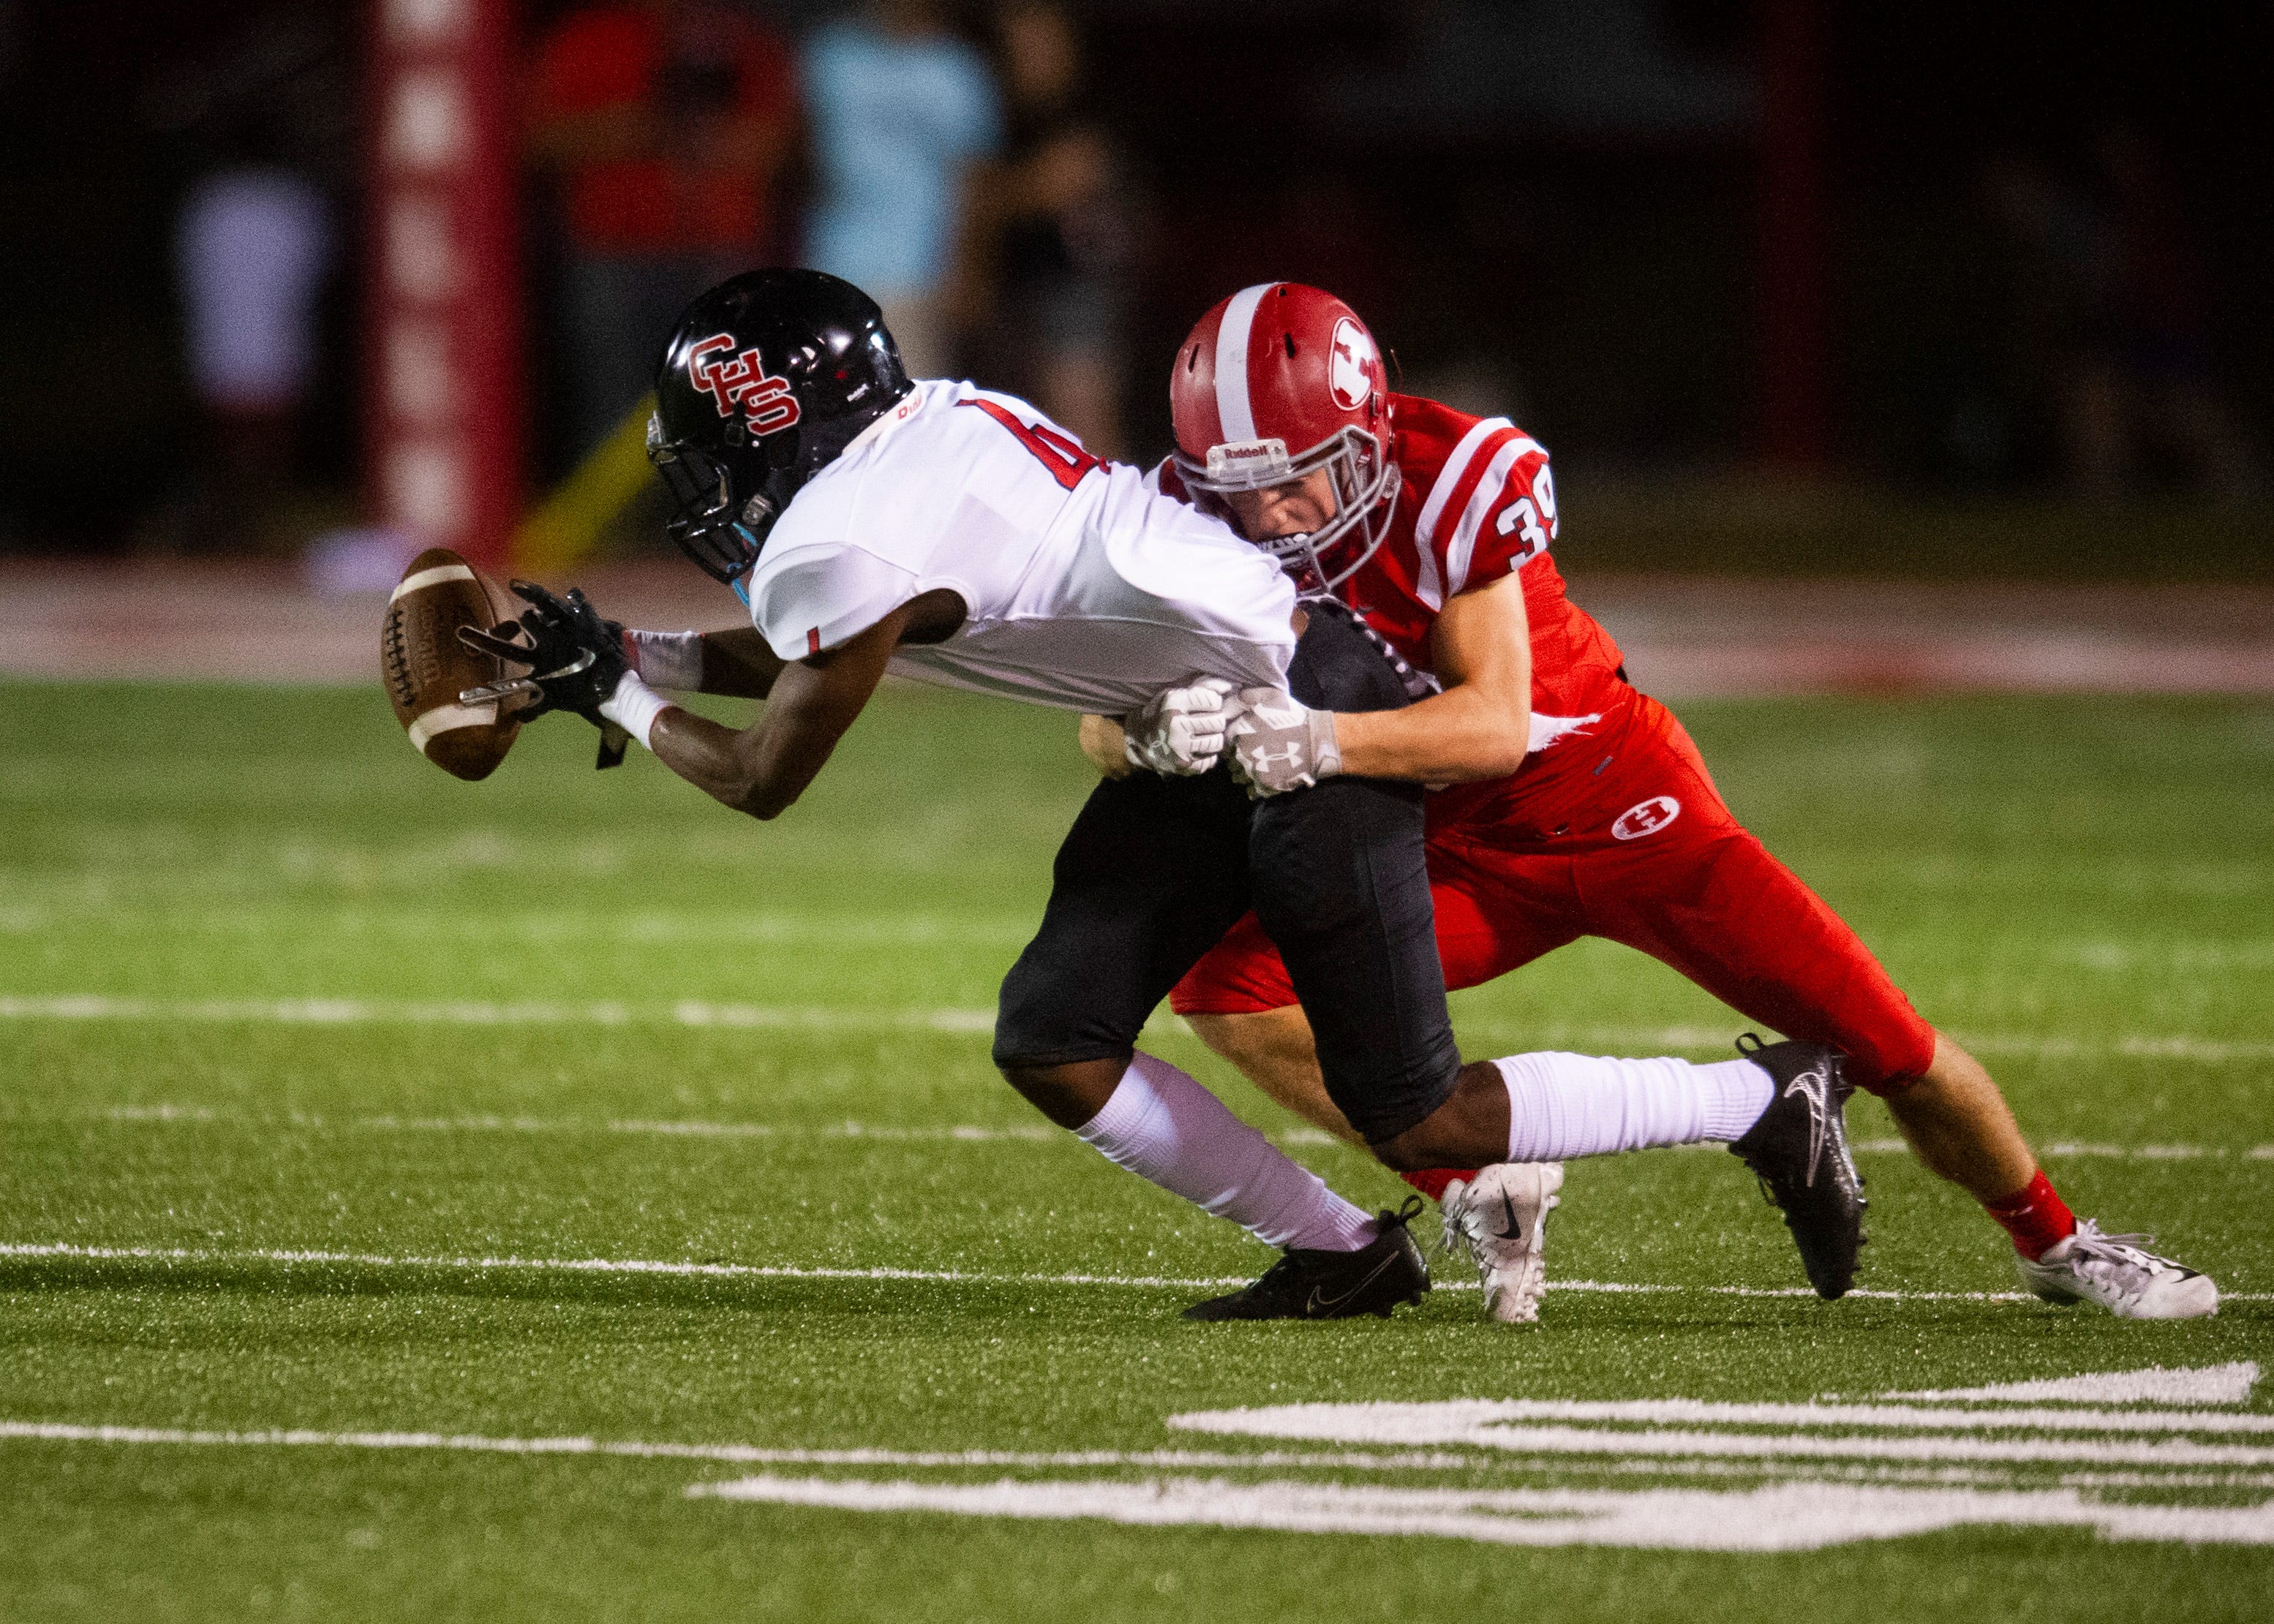 Central's Jonathan Mynatt (4) holds on to the ball with the tips of his fingers as Halls' Caden Stephens (39) attempts to pull him down during the Halls and Central high school football game on Friday, October 4, 2019 at Halls High School.